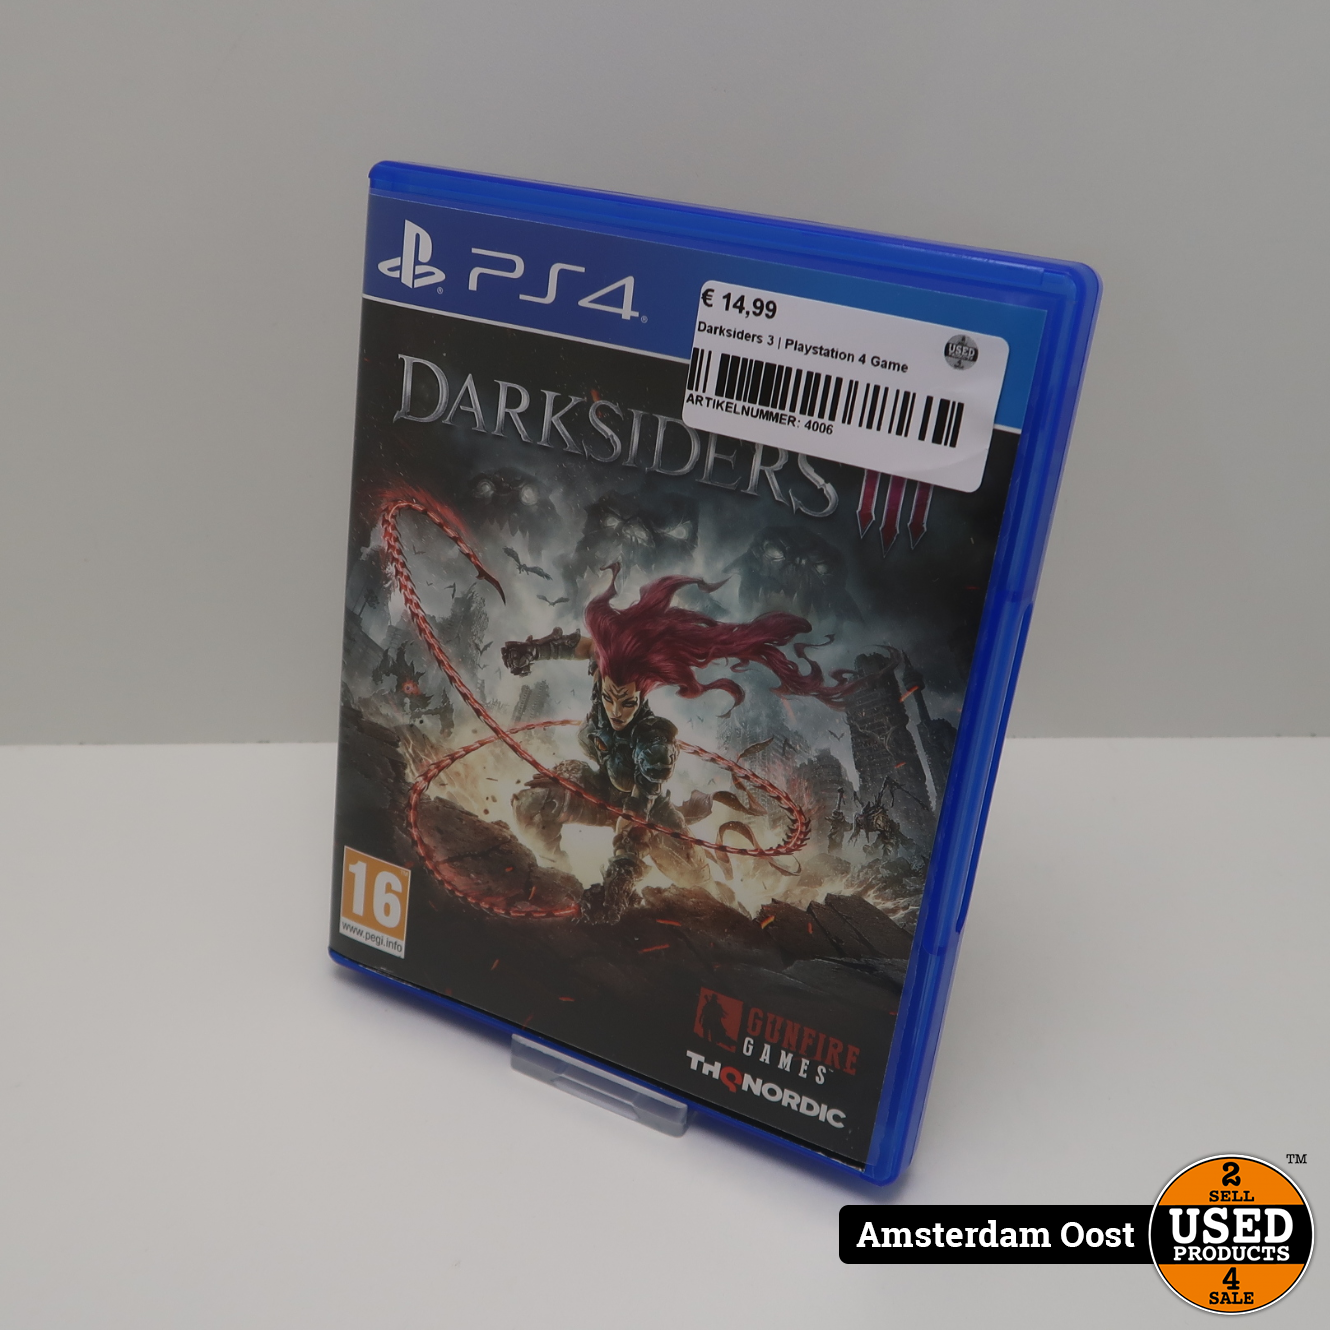 Darksiders 3 Playstation 4 Game Used Products Amsterdam Oost